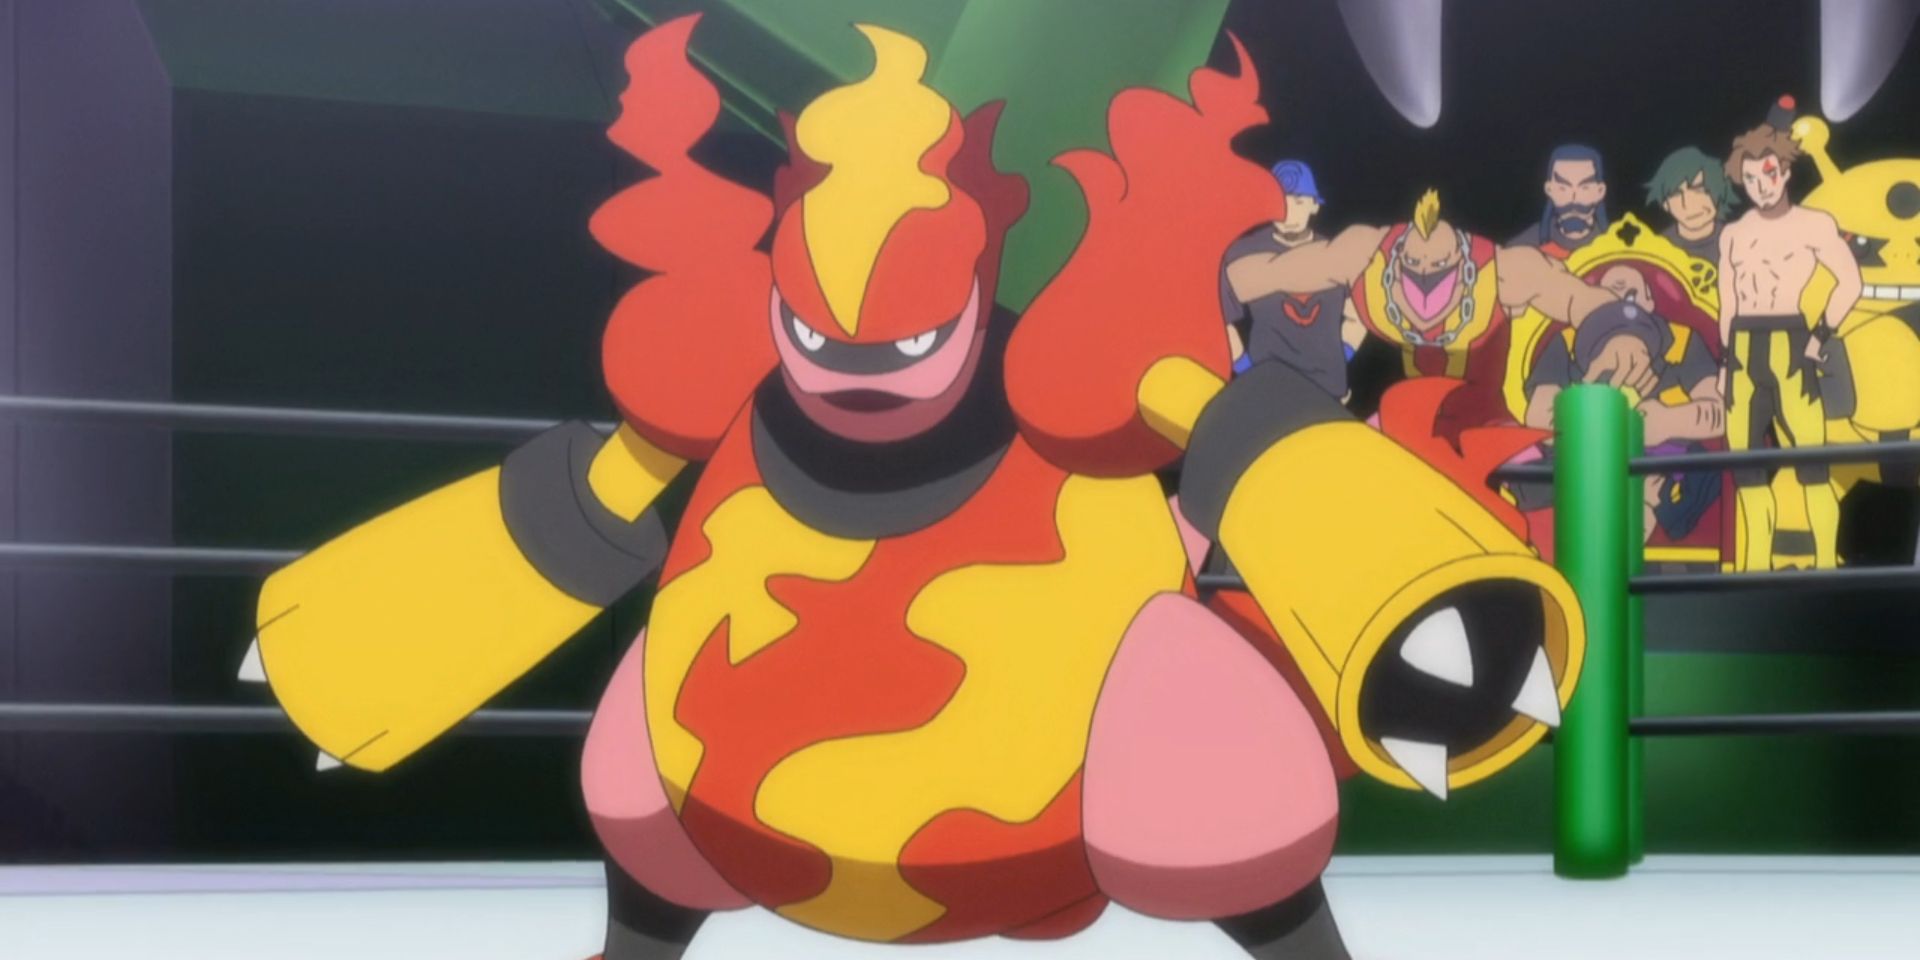 Magmortar stands ready to fight in a Pokemon battle arena in a Pokemon anime.